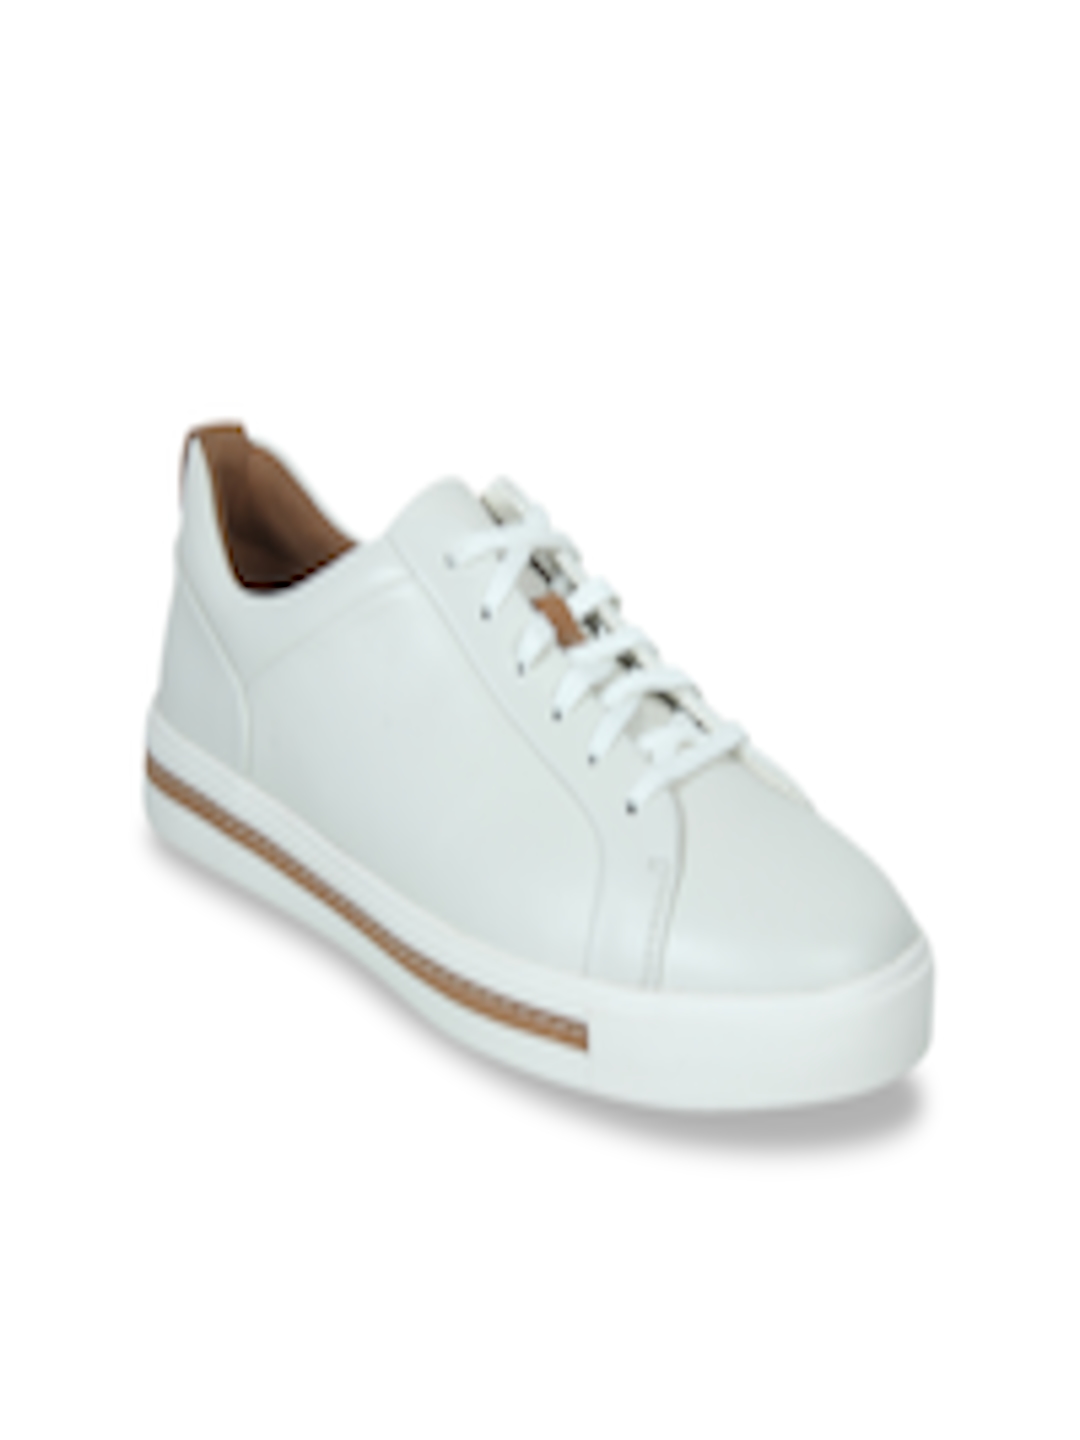 Buy Clarks Women White Solid Leather Sneakers - Casual Shoes for Women ...